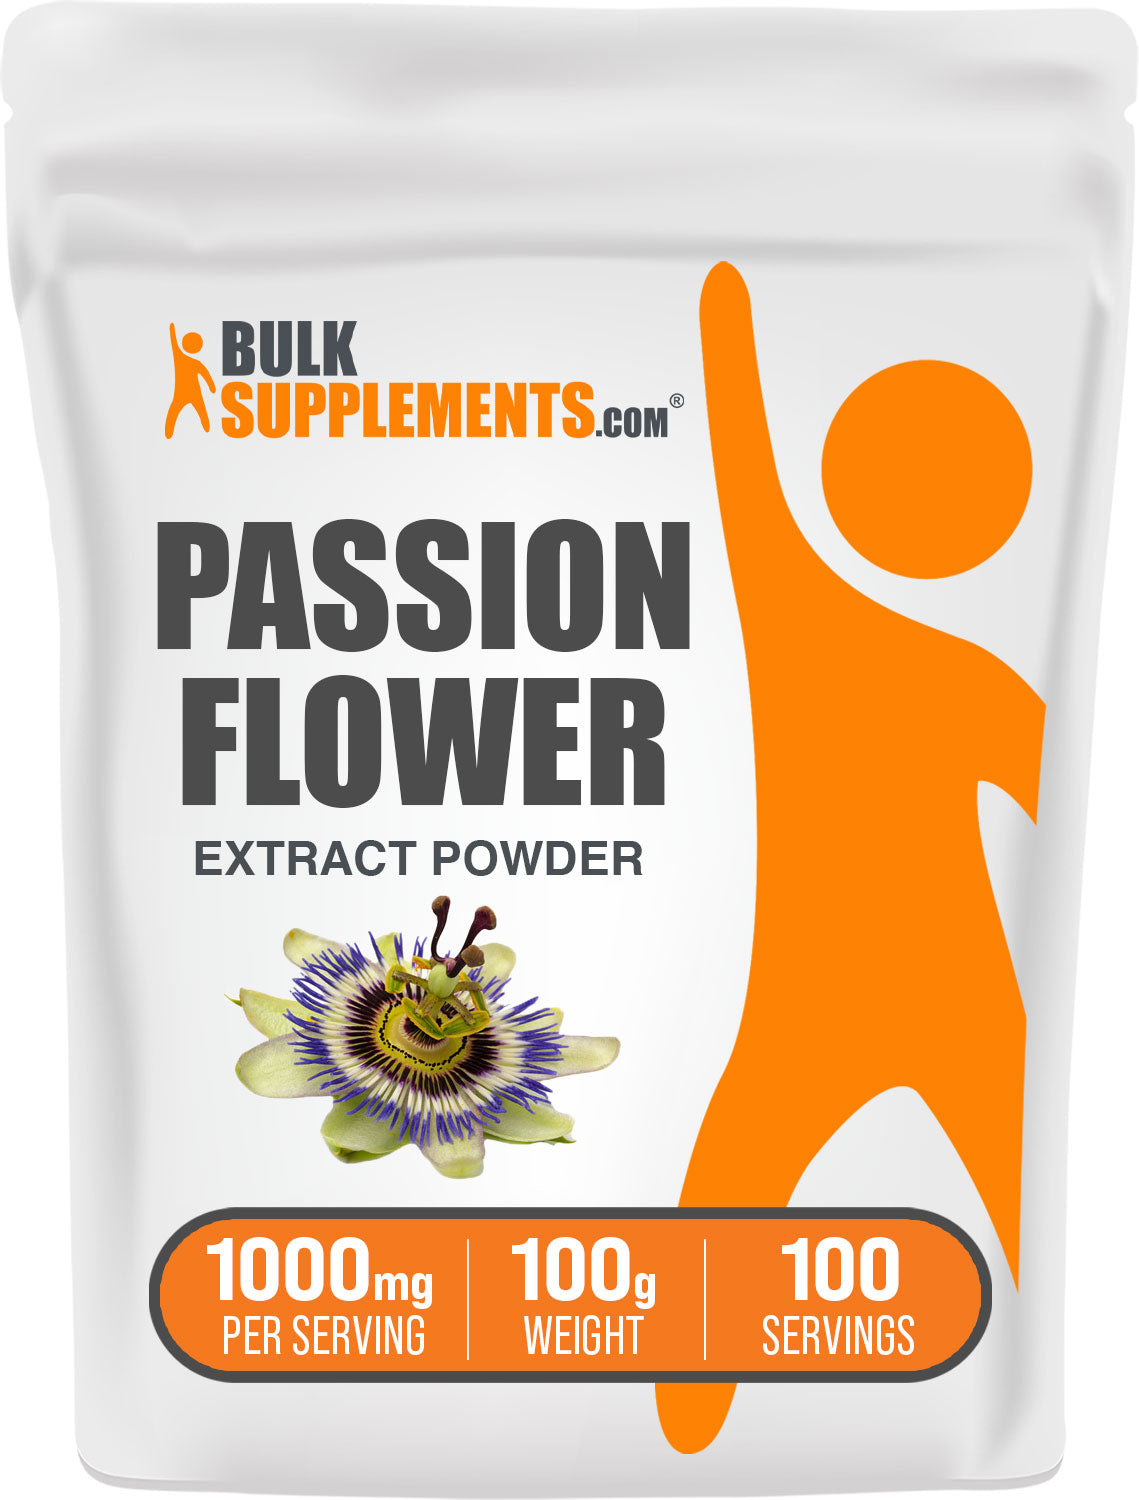 Passion Flower Extract 100g Bag